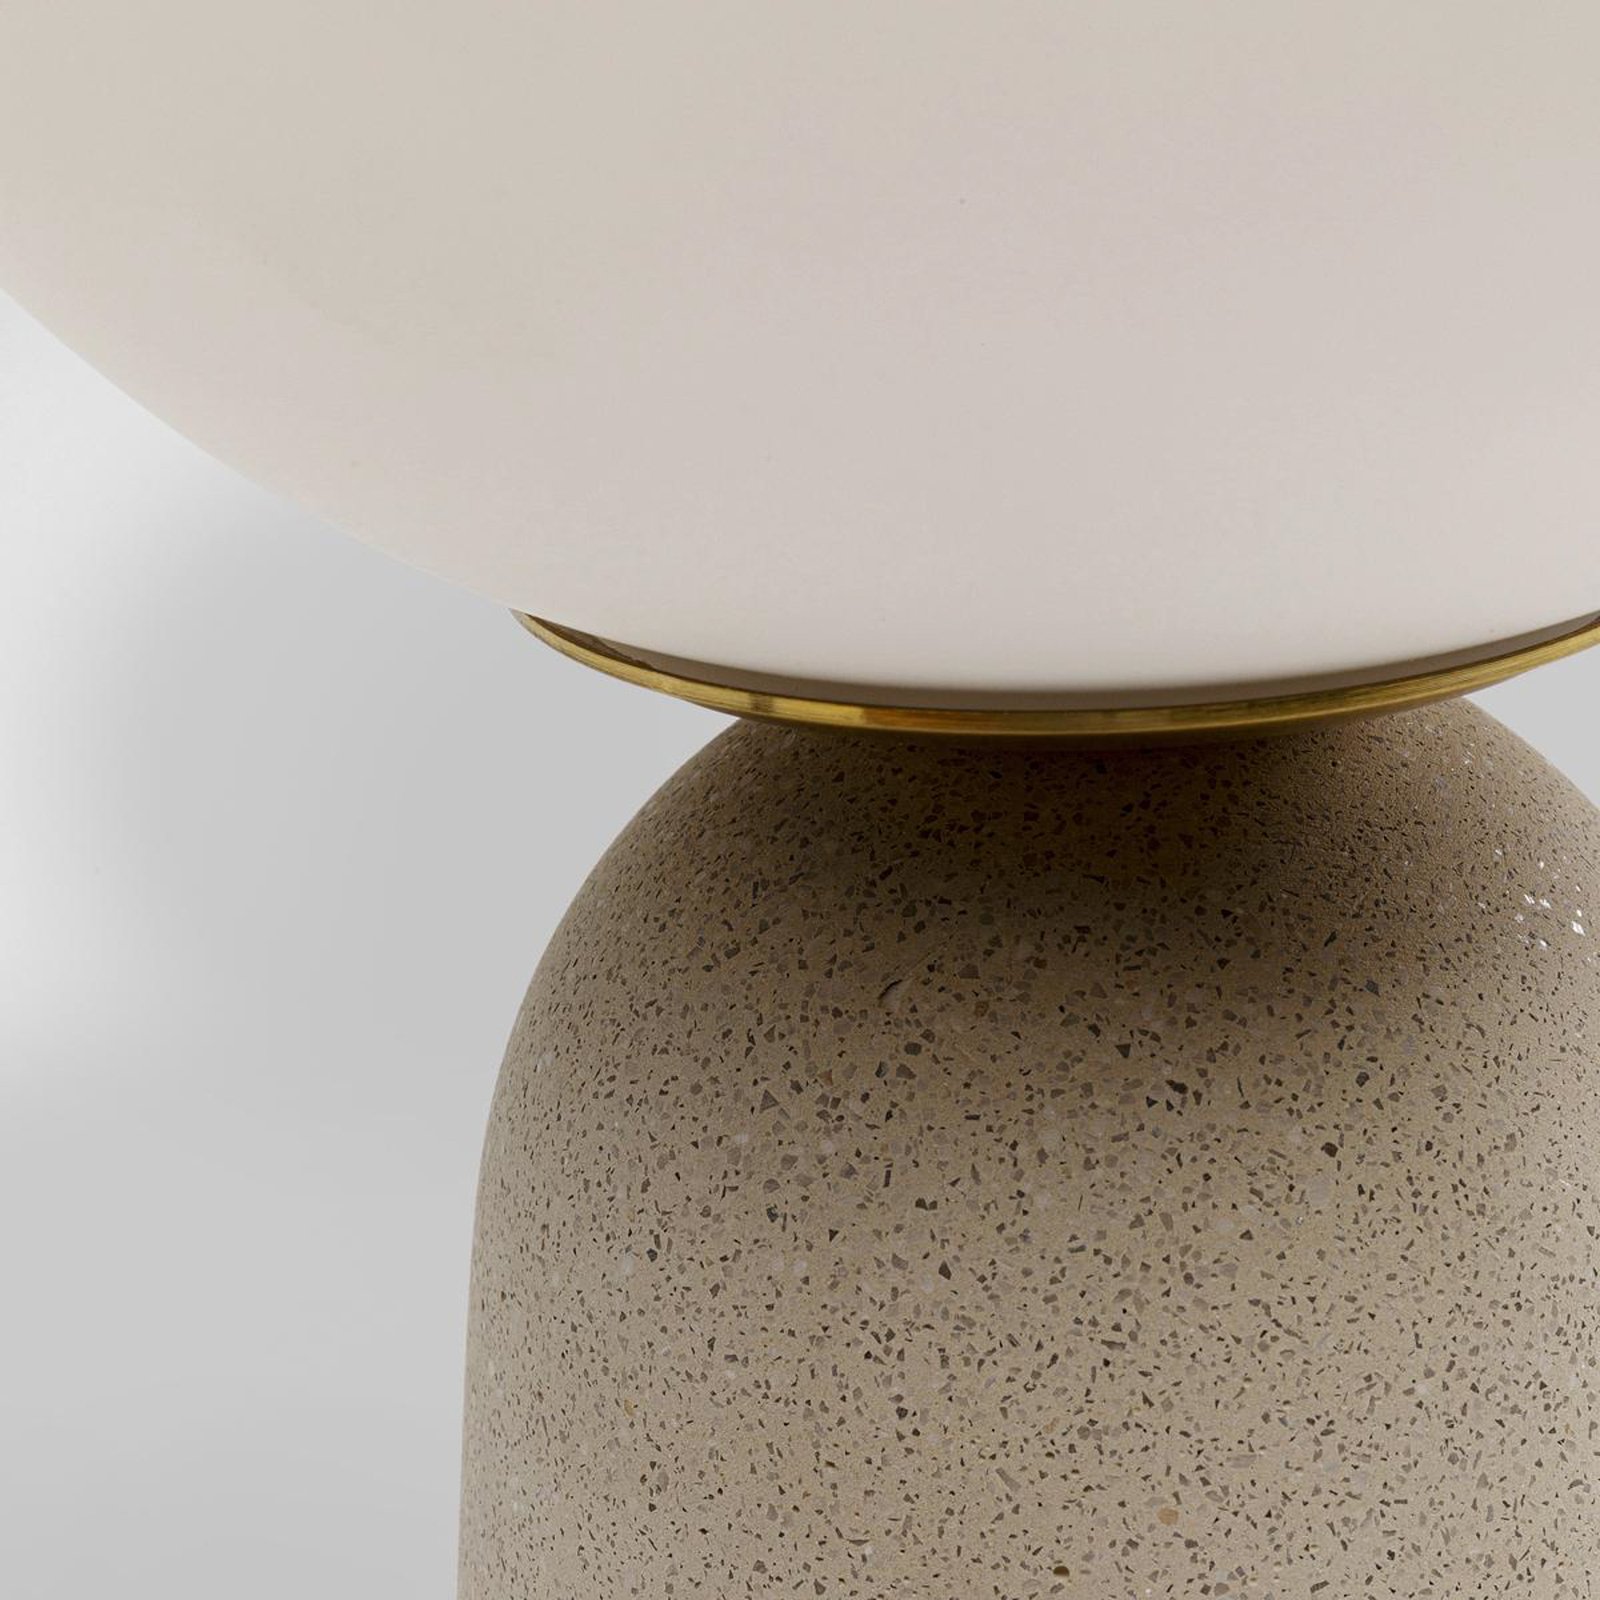 KARE table lamp Bollie, concrete base beige, opal glass height 31 cm